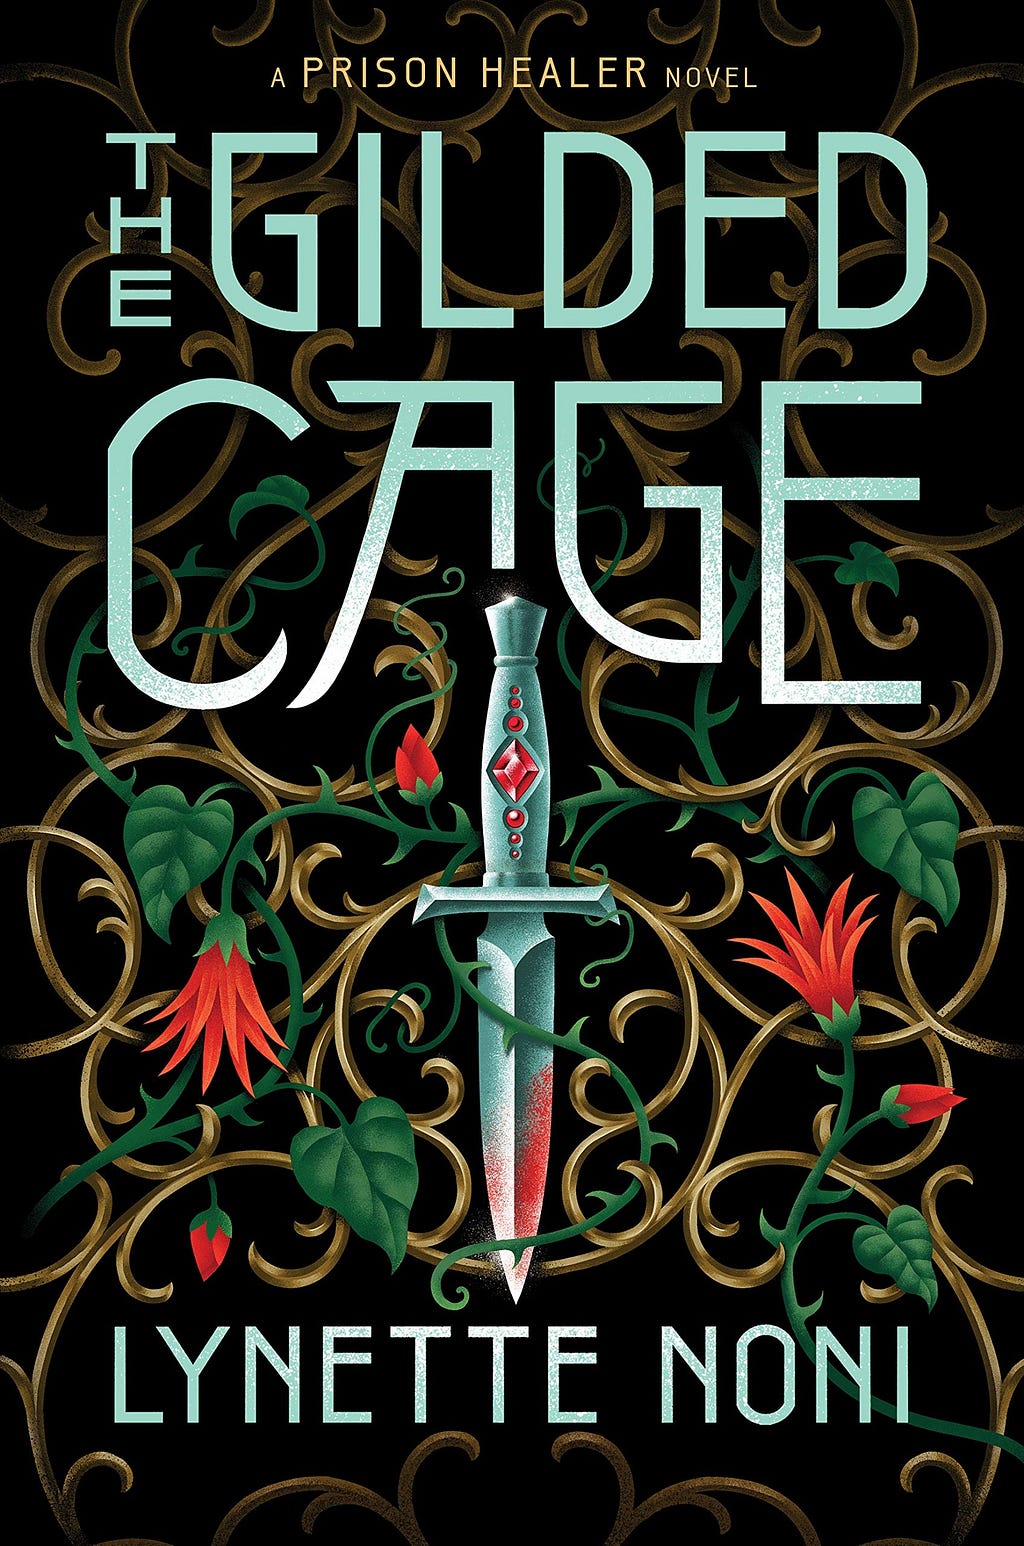 PDF The Gilded Cage (The Prison Healer, #2) By Lynette Noni